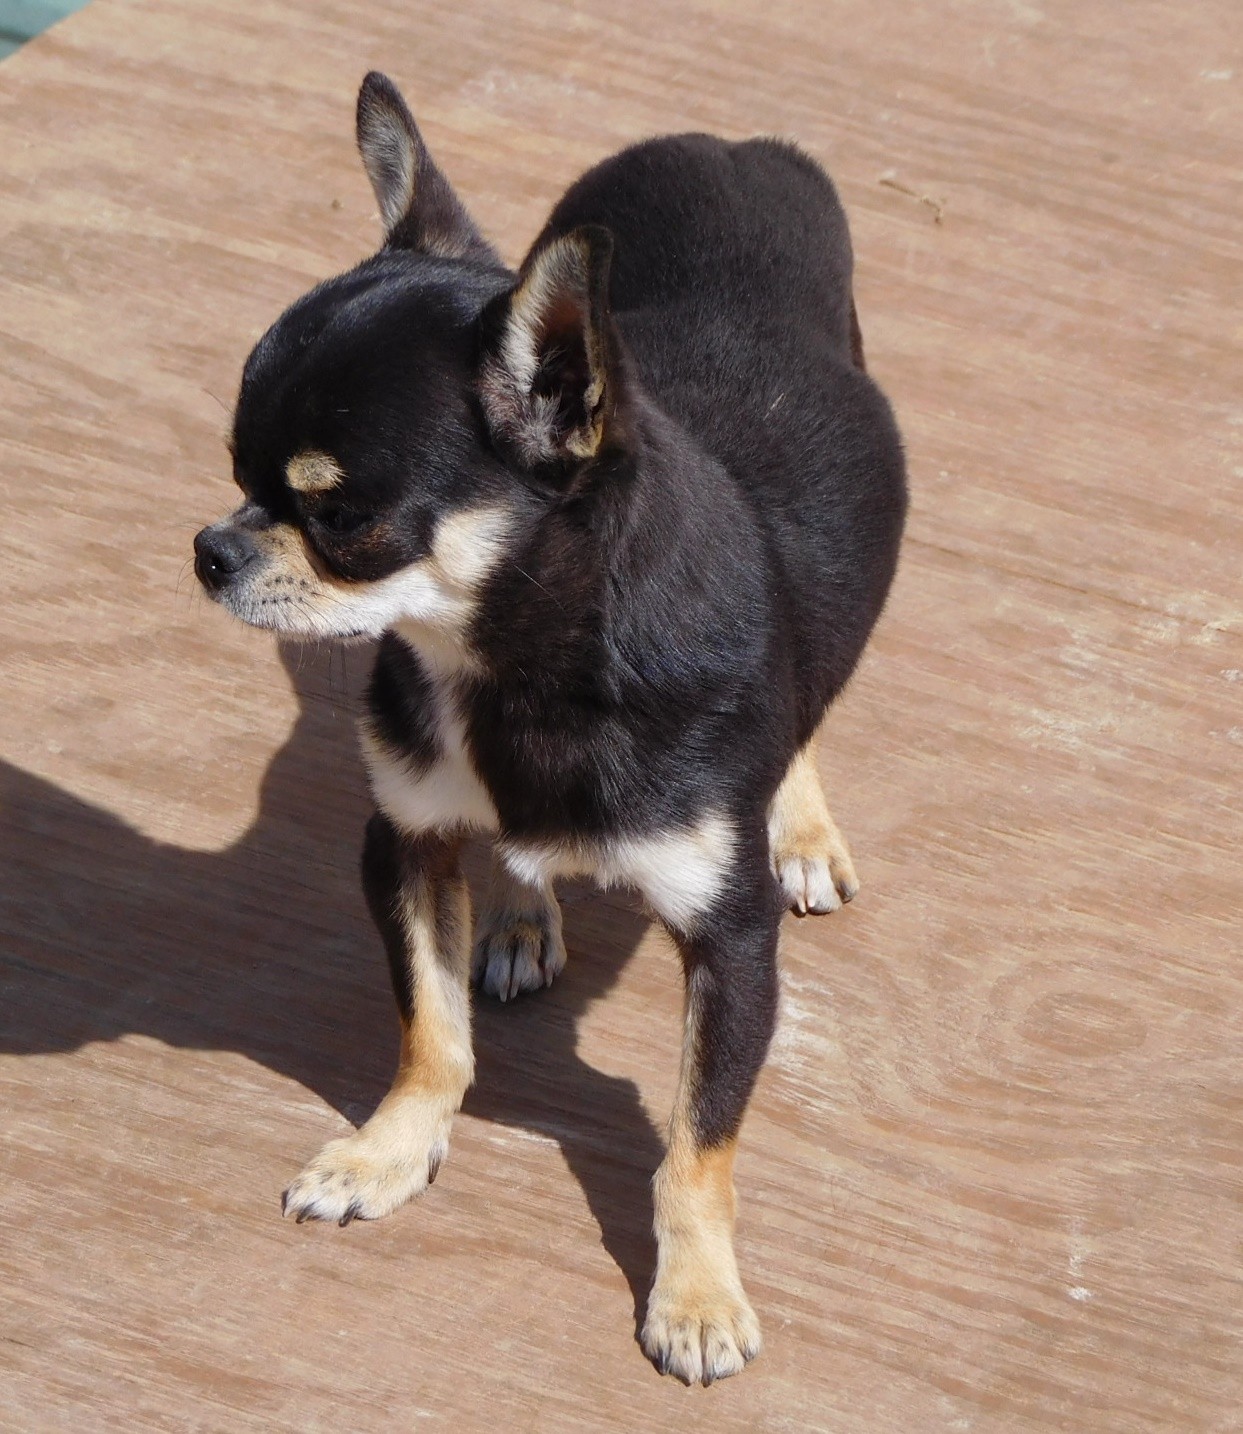 Arkansas breeder of top quality Chihuahuas.
Chihuahua puppies for sale.